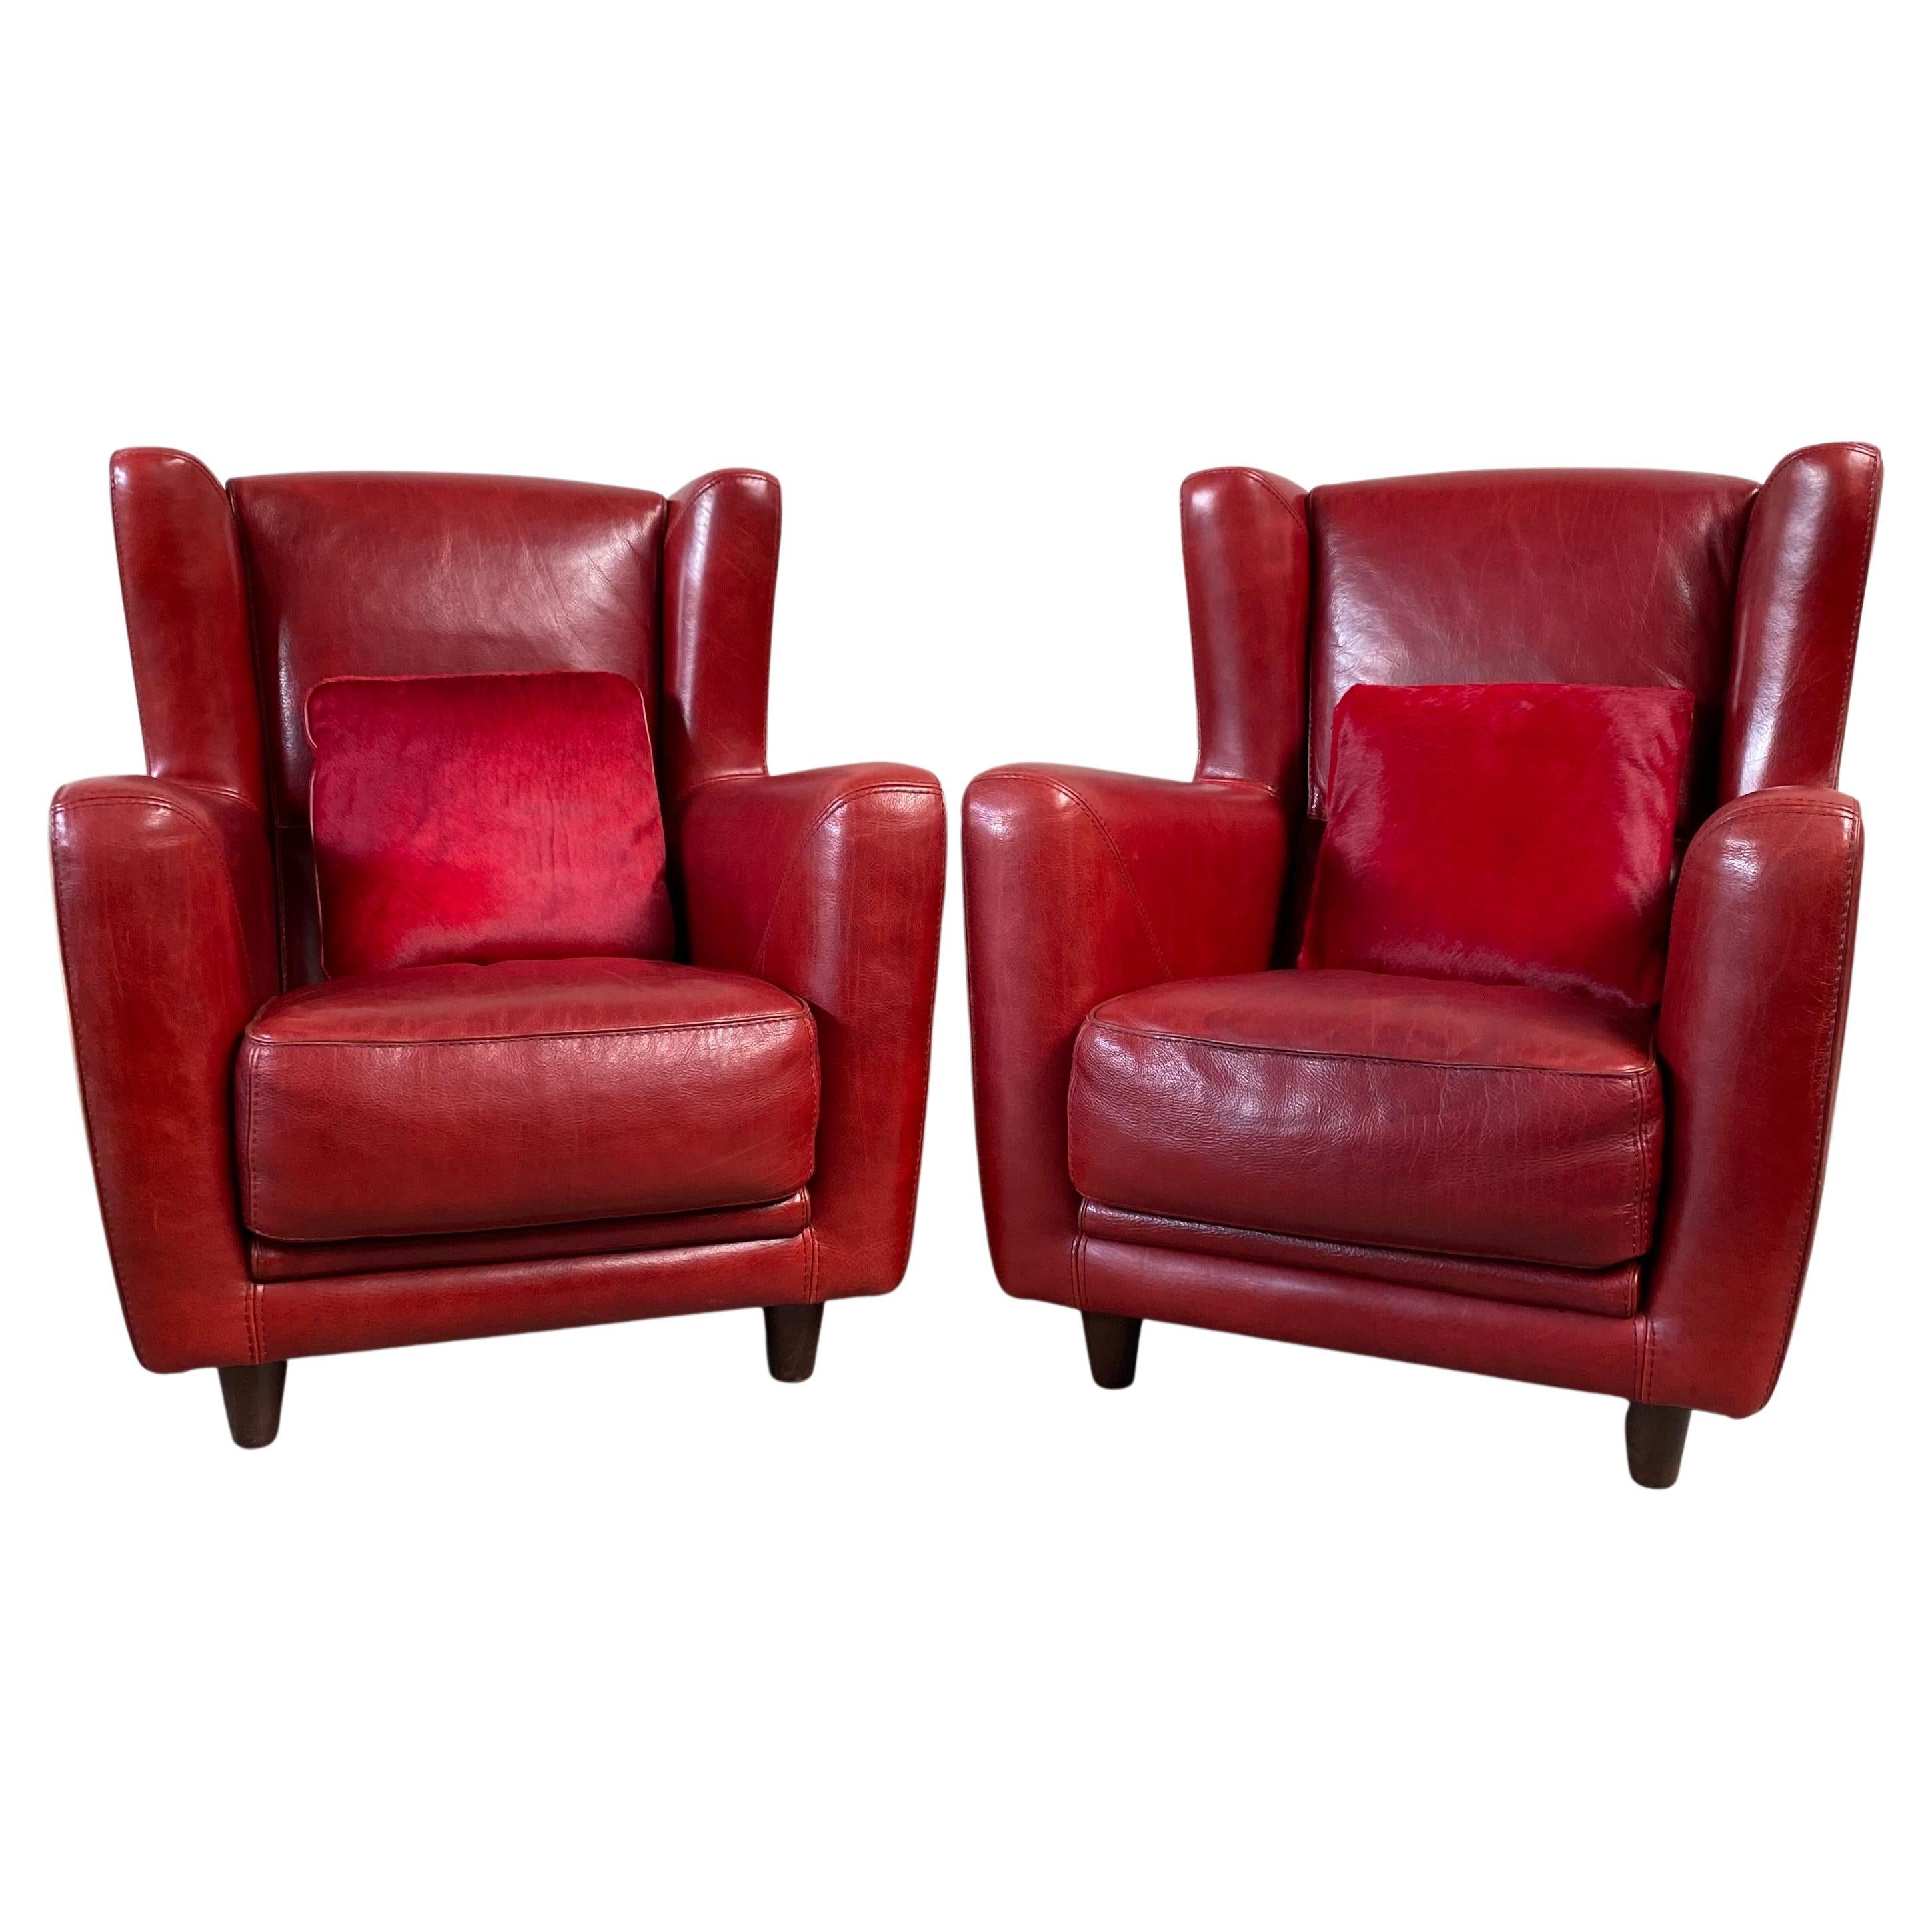 Pair of Ox-Blood Red Leather Lounge Chairs Begére by Baxter Italy 90s For Sale